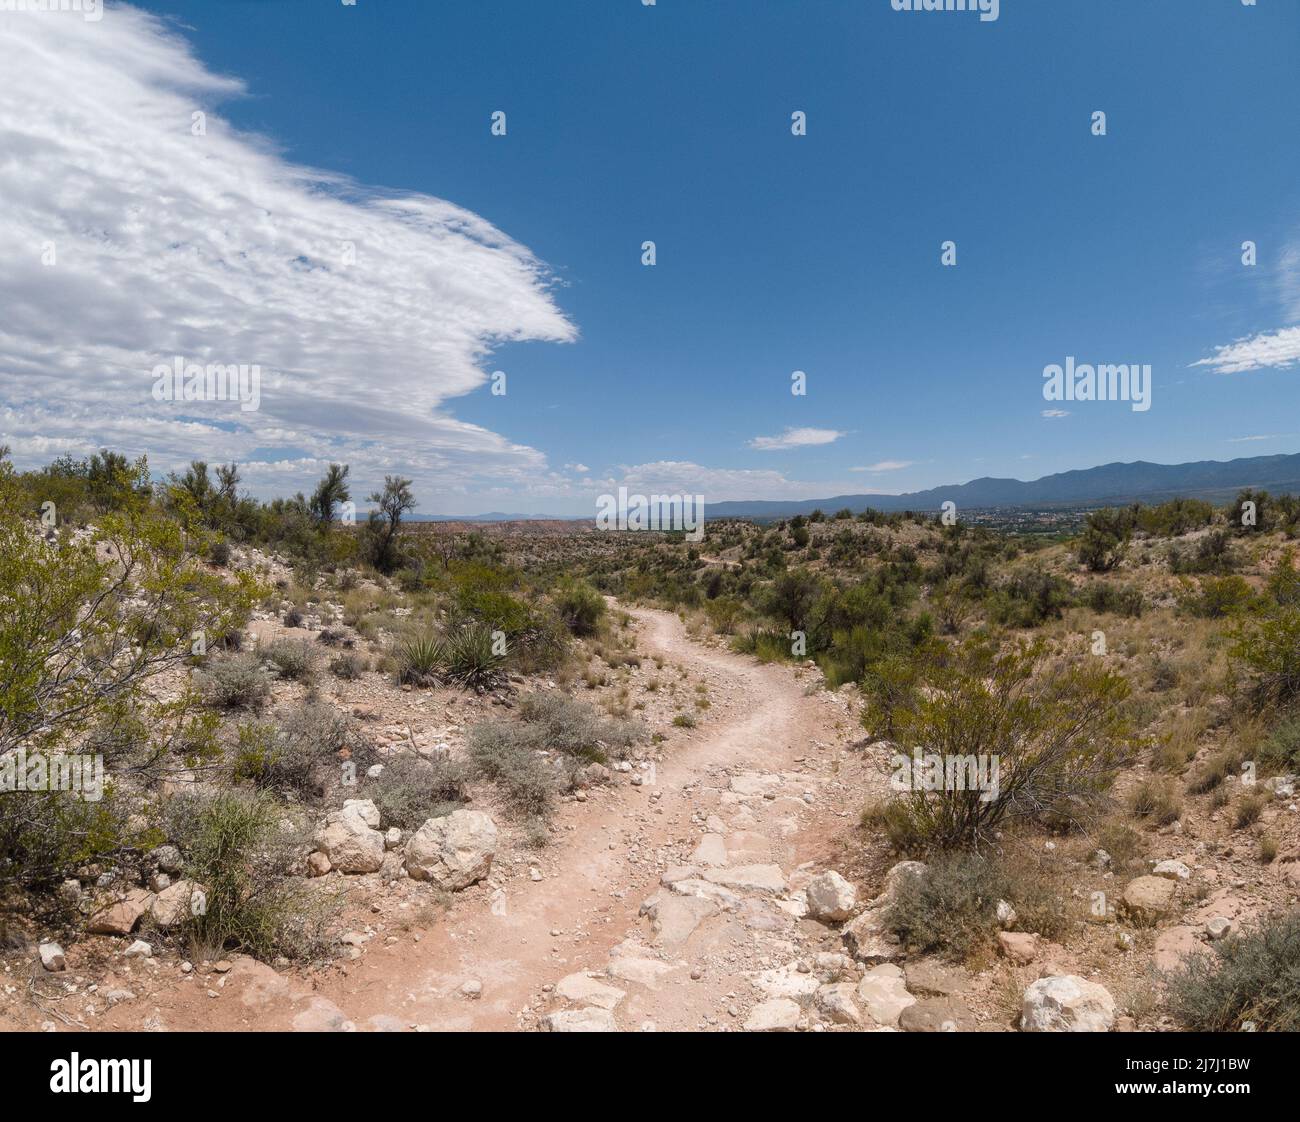 Rocky hiking path in the desert with a blue sky split by incoming clouds. Stock Photo